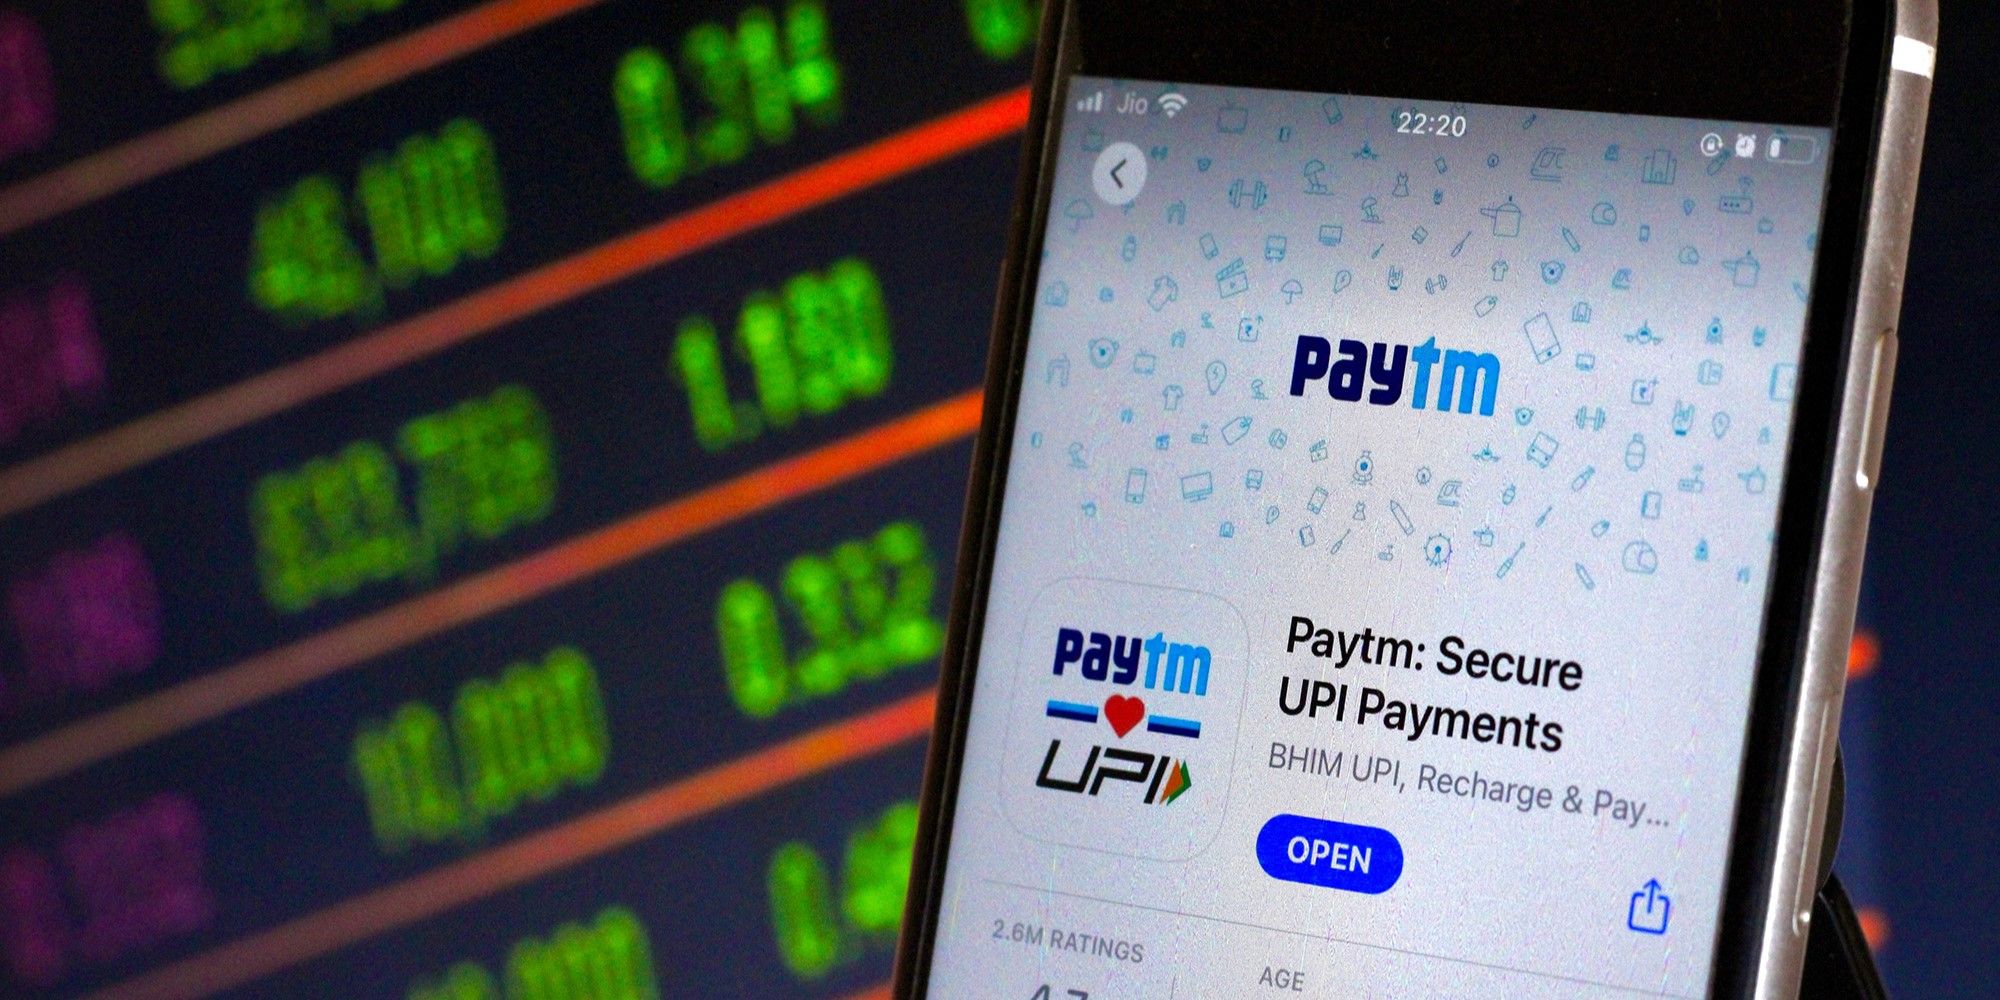 Paytm, PPBL to discontinue inter-company agreements amidst RBI restrictions